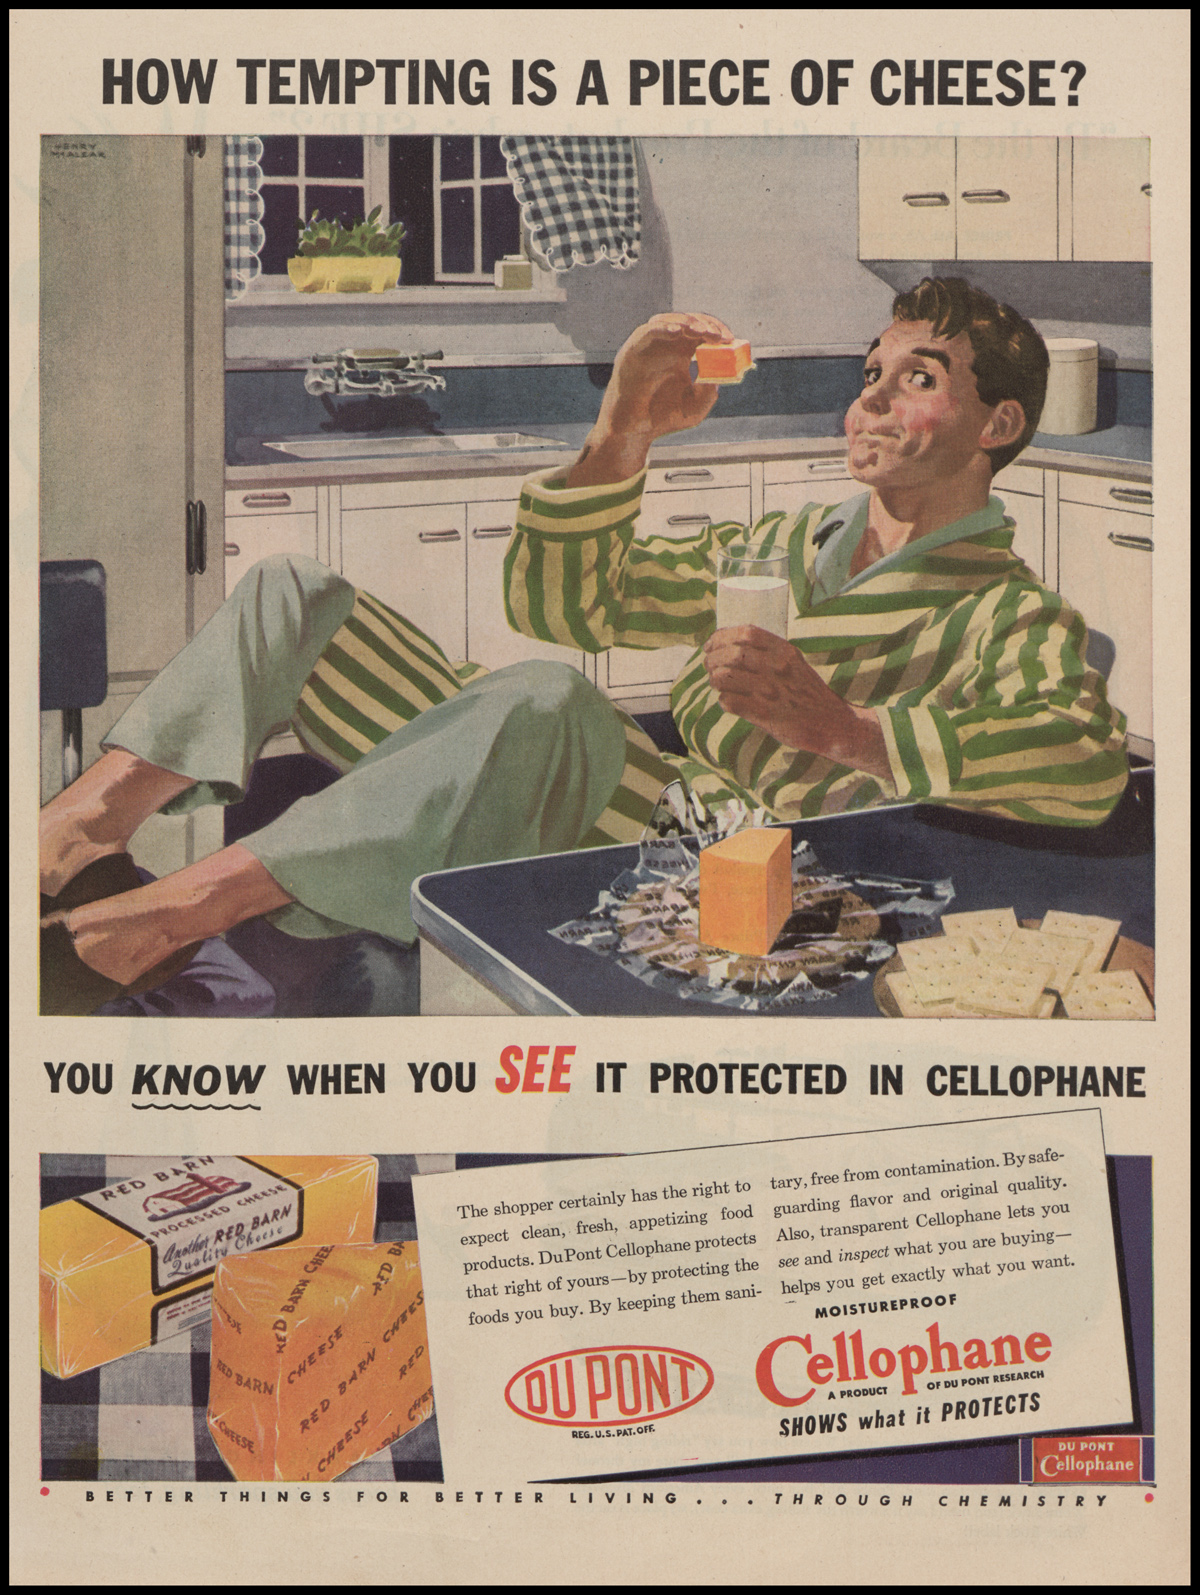 Advertisement for DuPont Cellophane featuring a man eating shrink wrapped cheese.